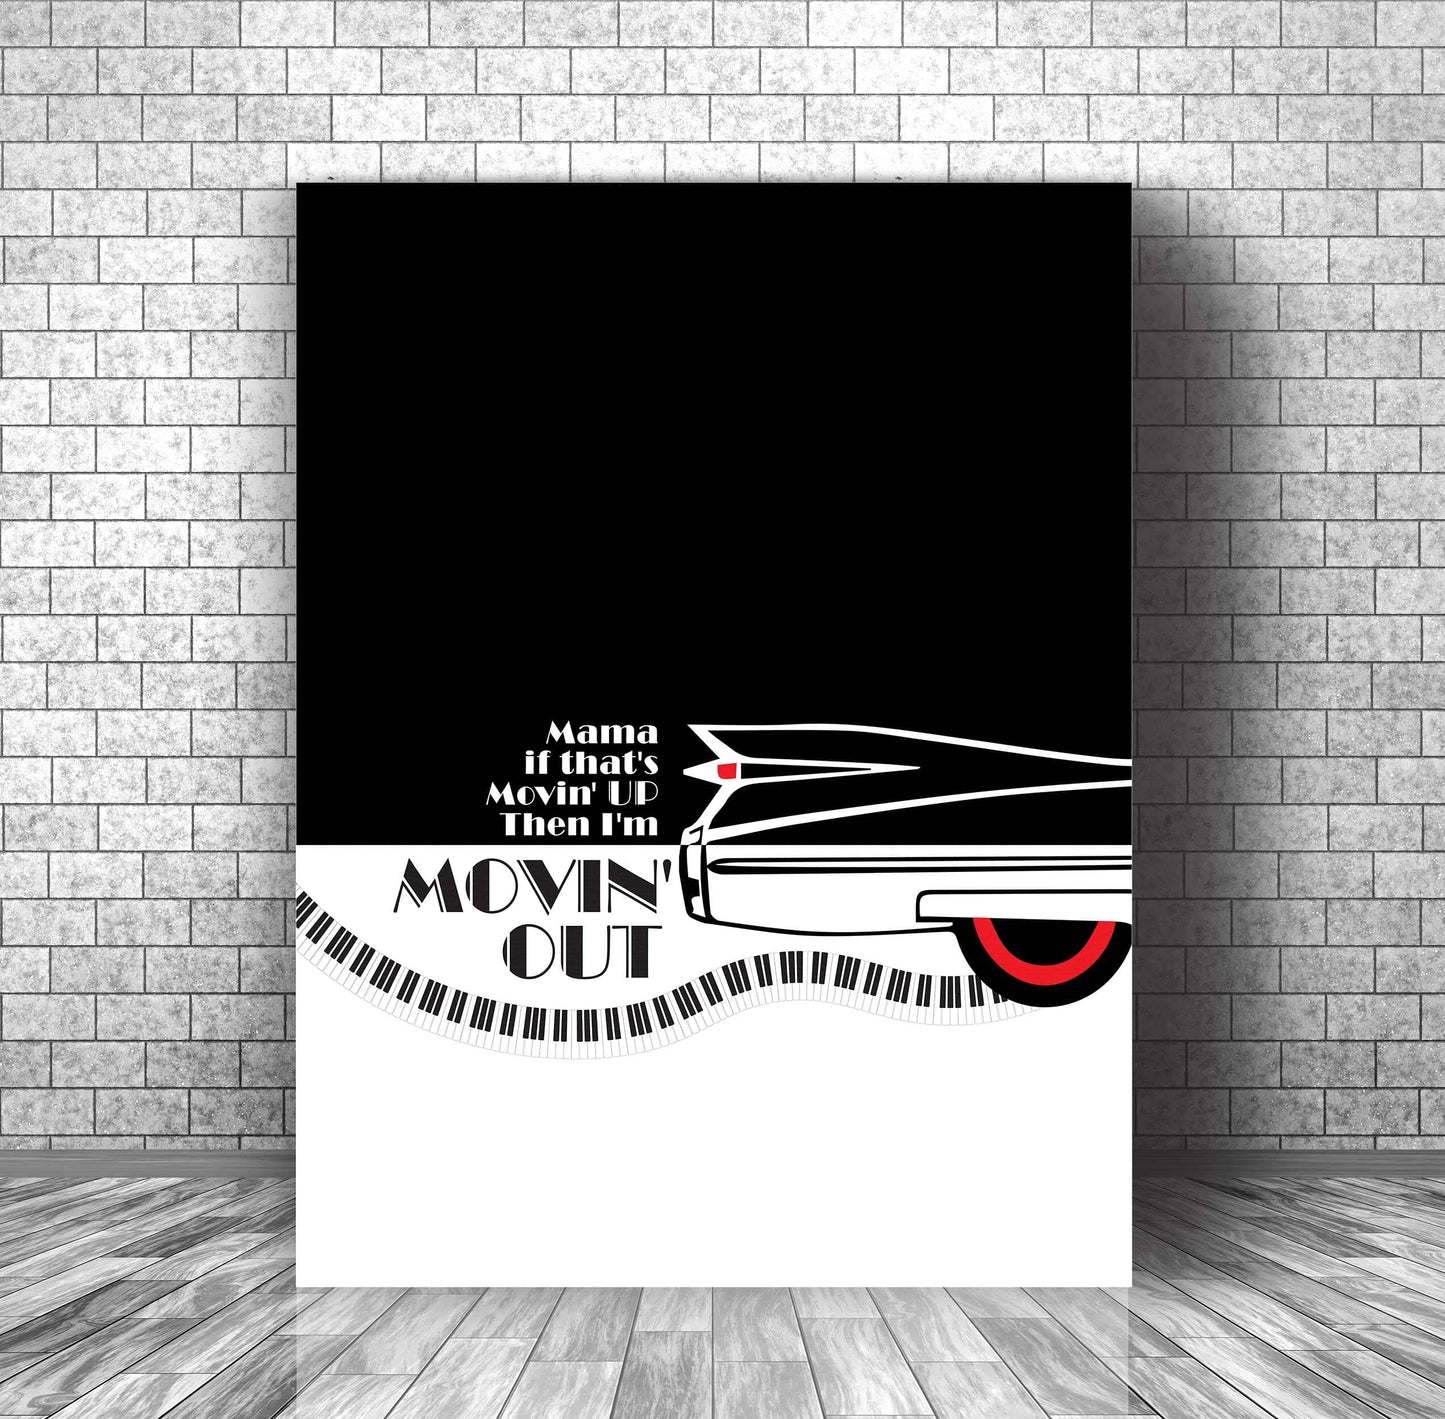 I'm Movin' Out (Anthony's Song) by Billy Joel - Music Art Song Lyrics Art Song Lyrics Art 11x14 Canvas Wrap 